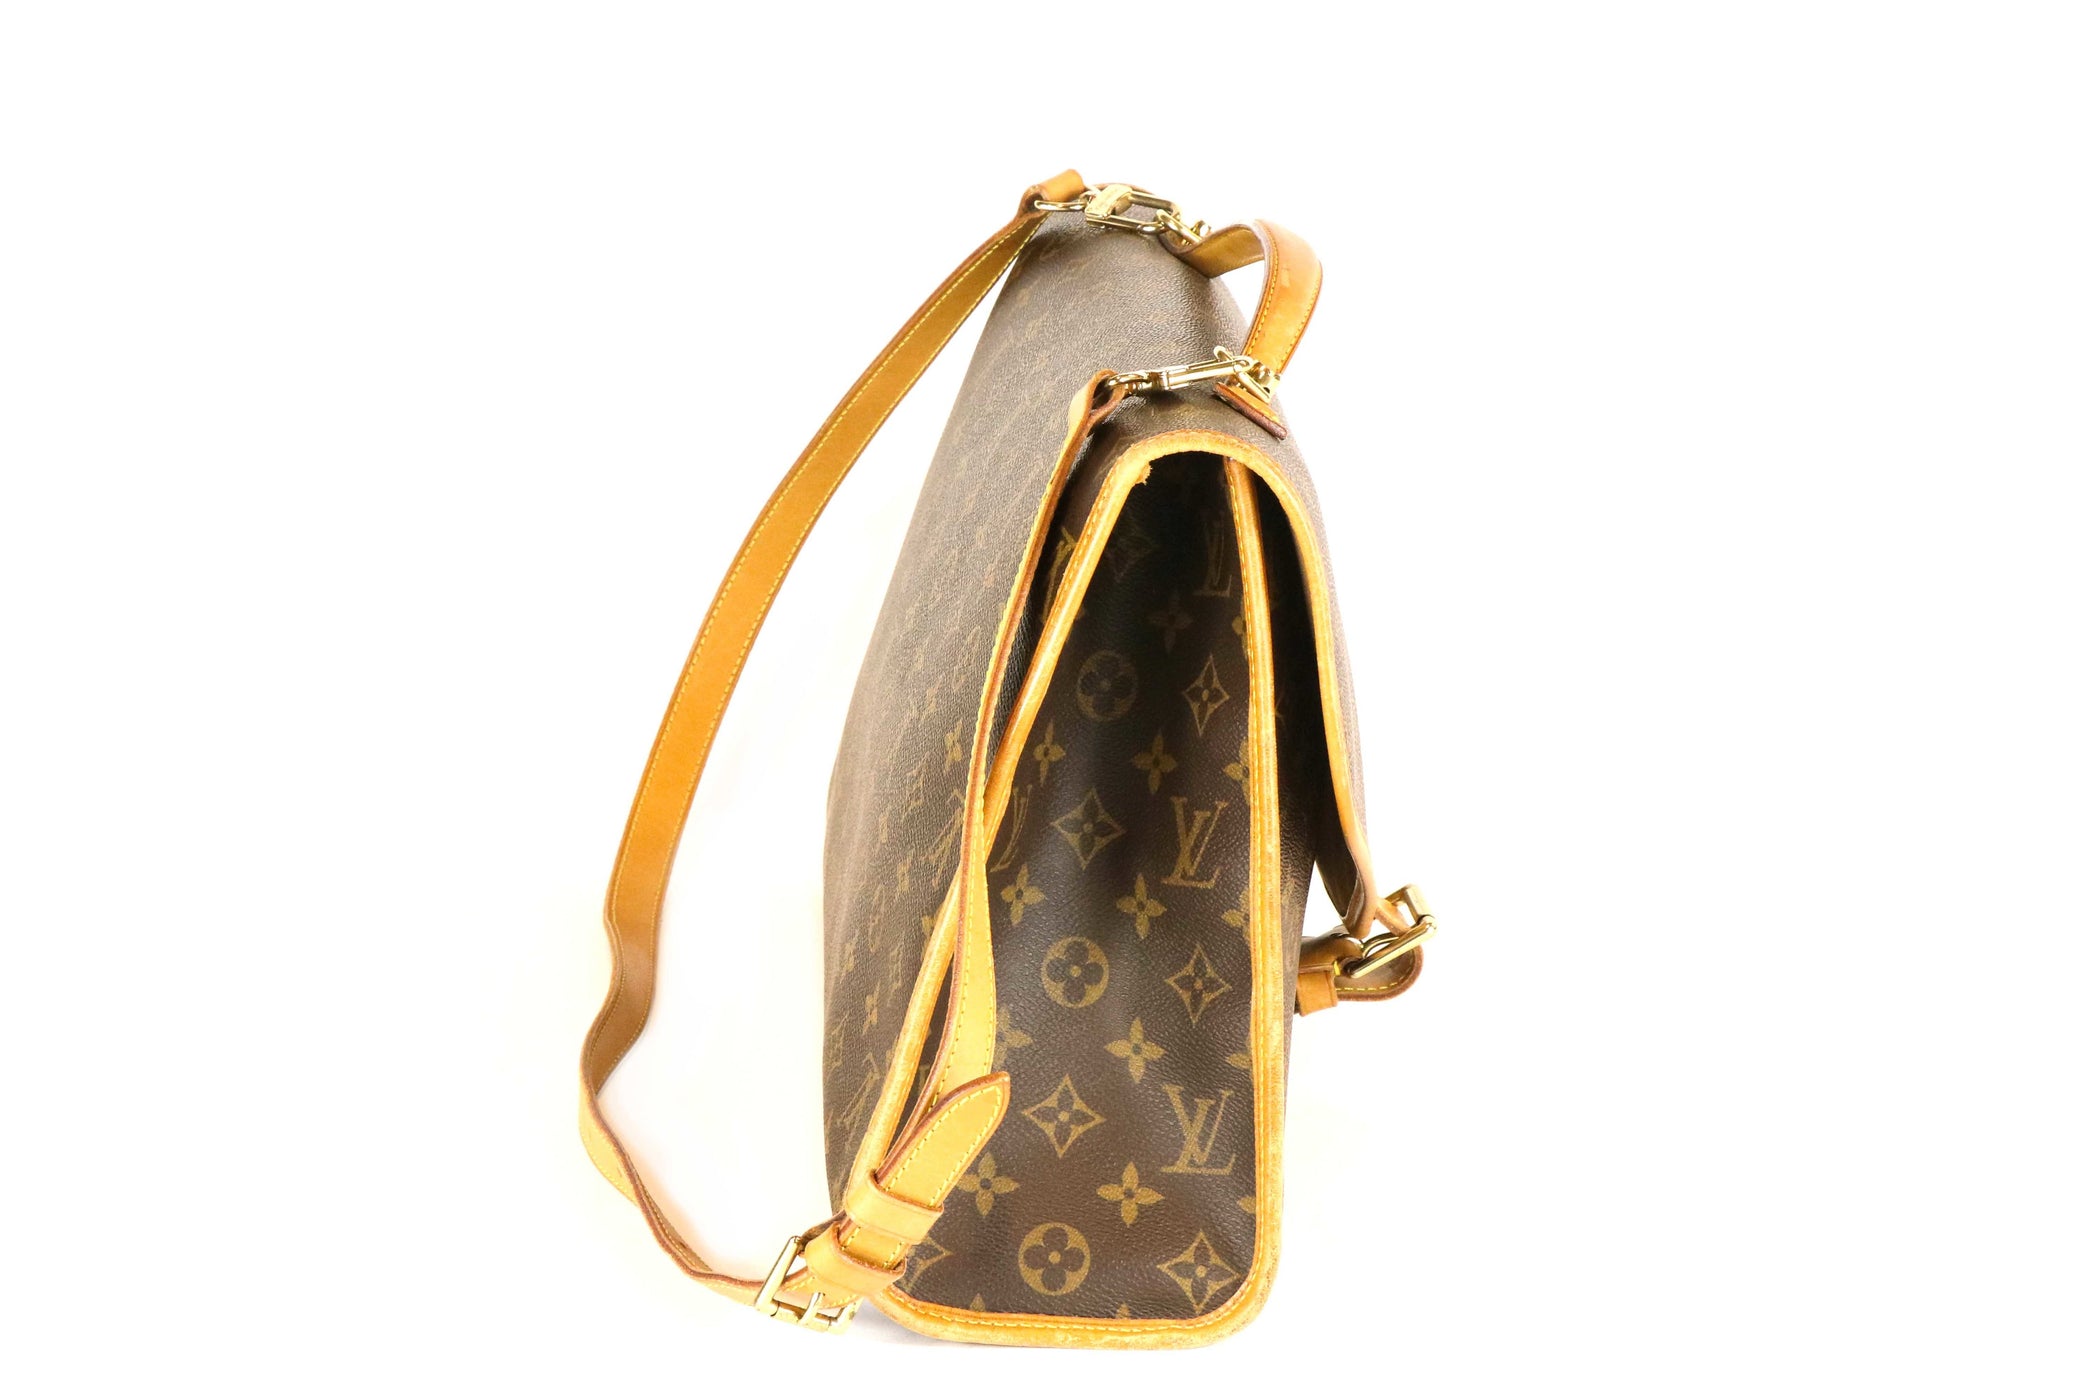 You could buy a plane for that:' New $54,000 plane-shaped Louis Vuitton bag  mocked online